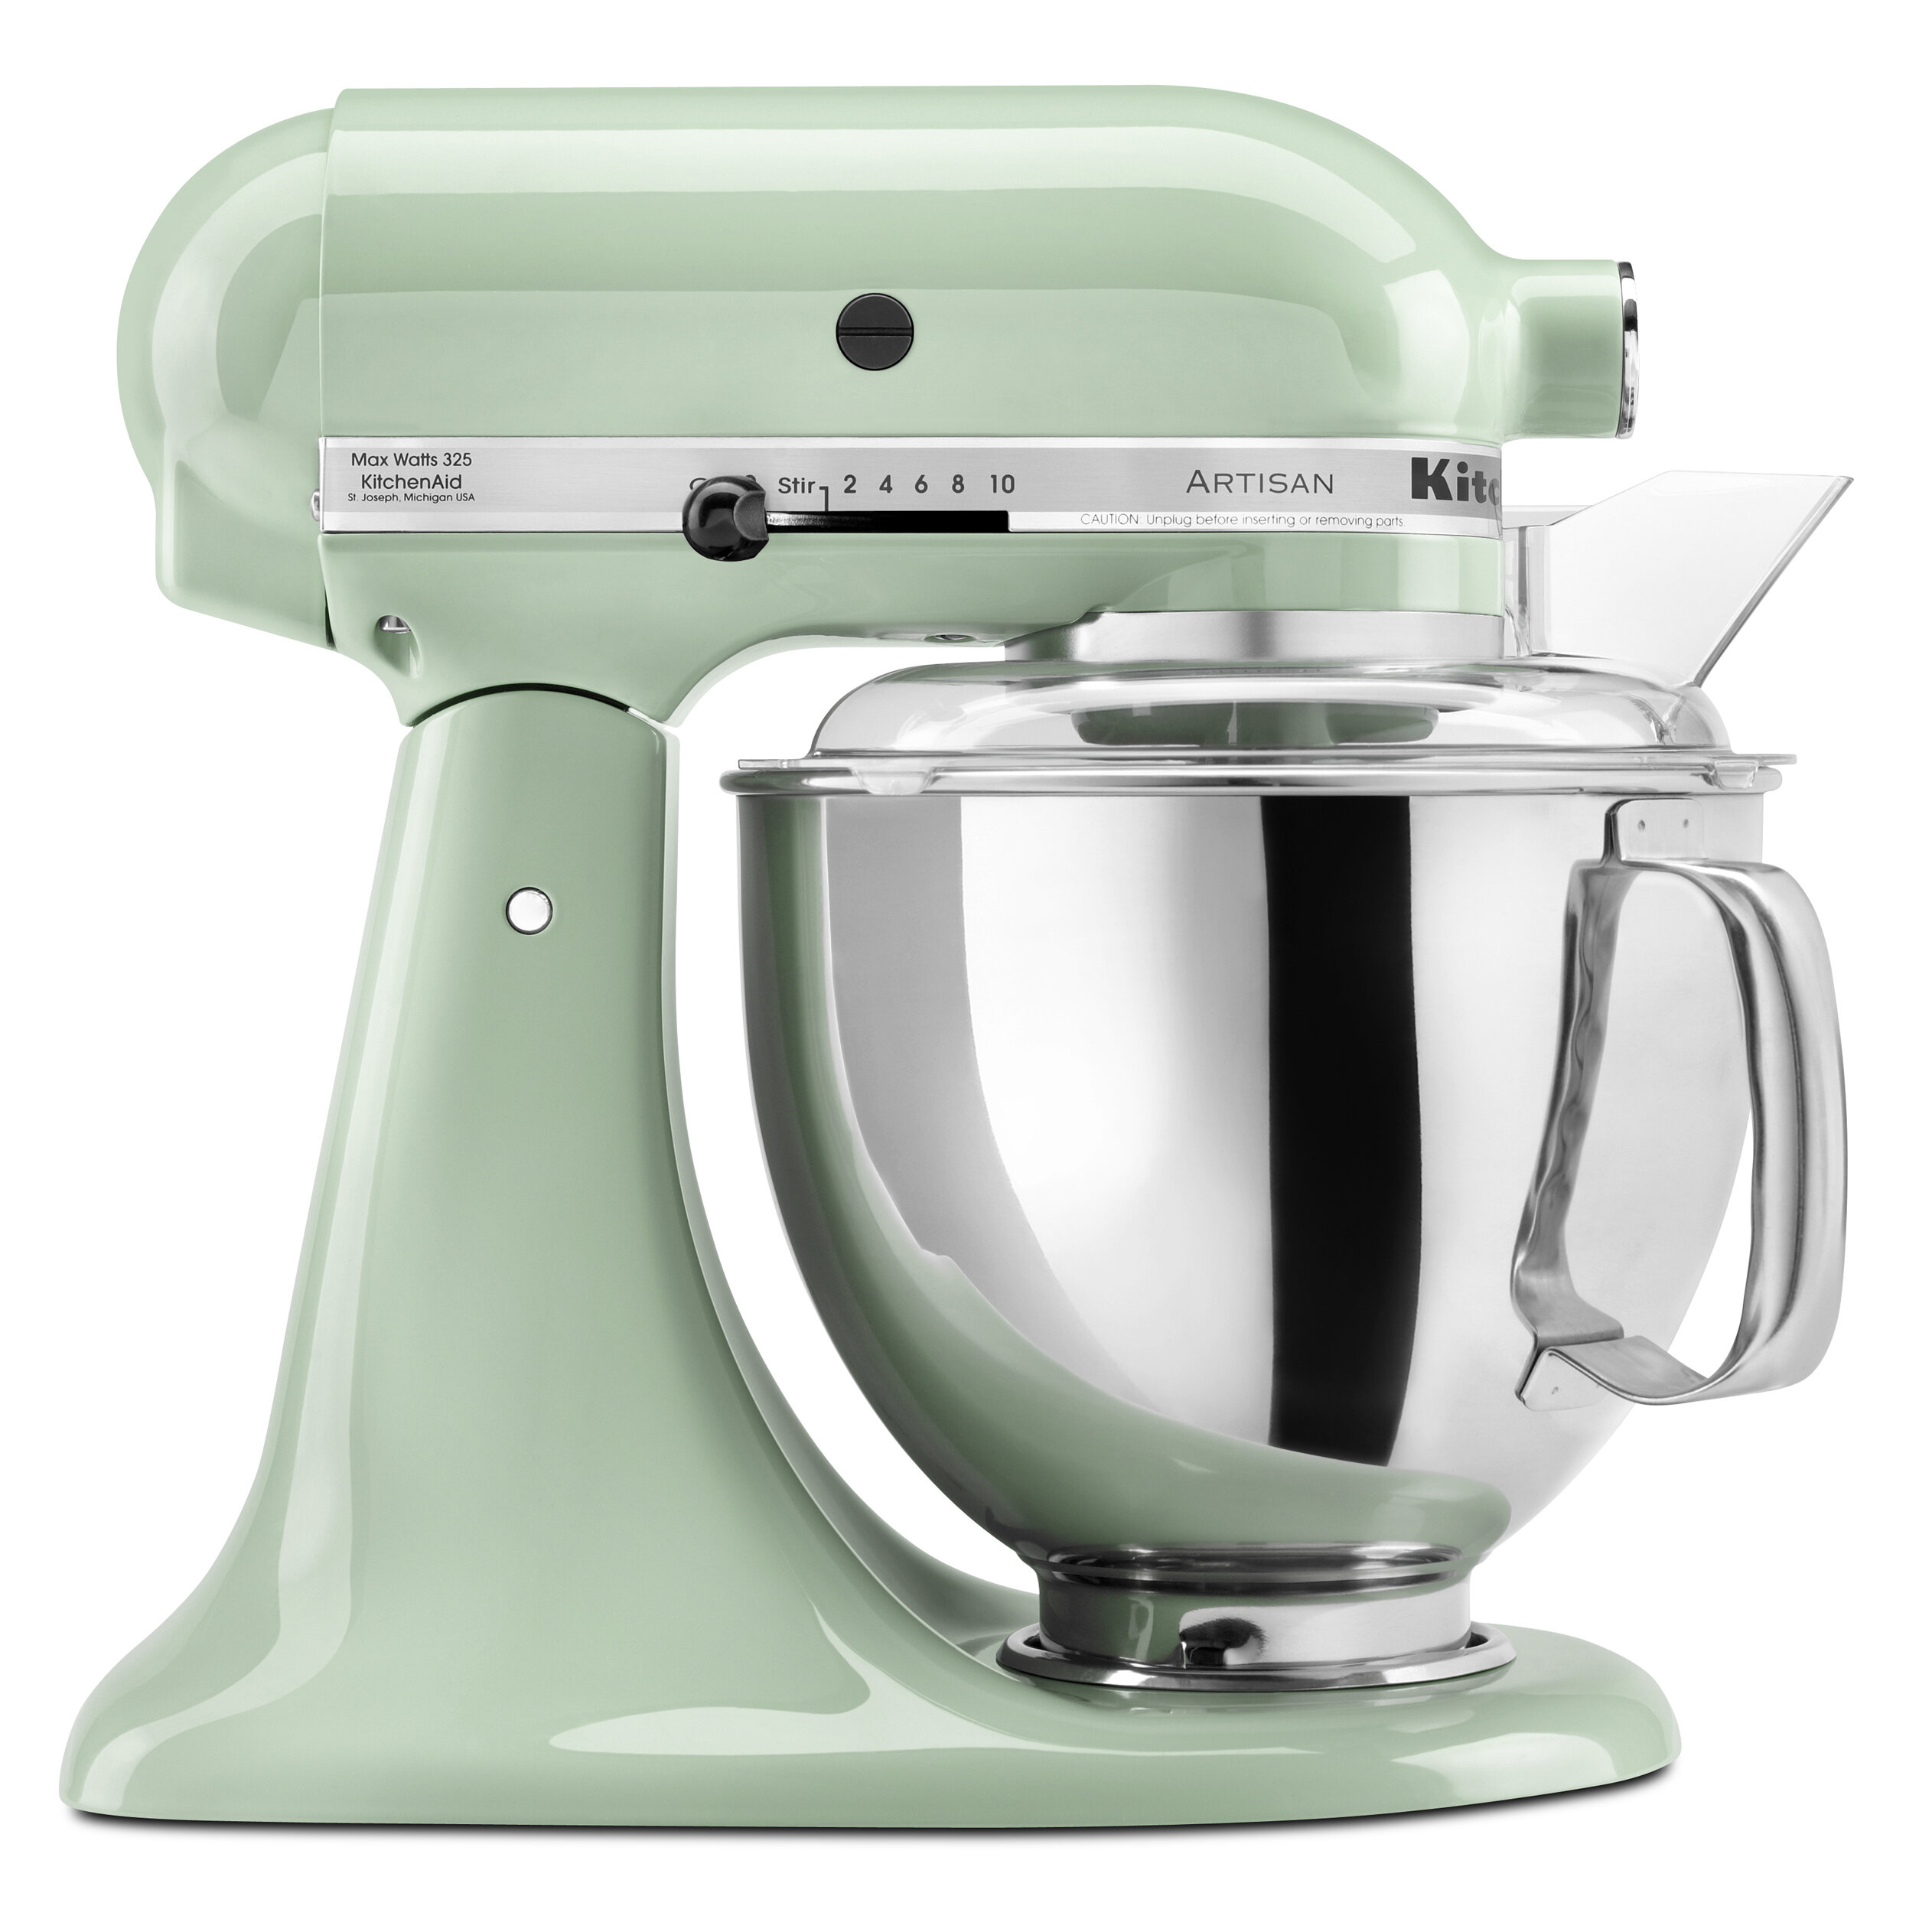 Ankishi 3 in 1 Electric Stand Mixer Blue/Green Professional 1100W Stand Mixer with 5 L Stainless Steel Bowl Blender and Juicer 10 Speed Kitchen Electric Aids Mixer Multiple Meat Mincer Grinder 